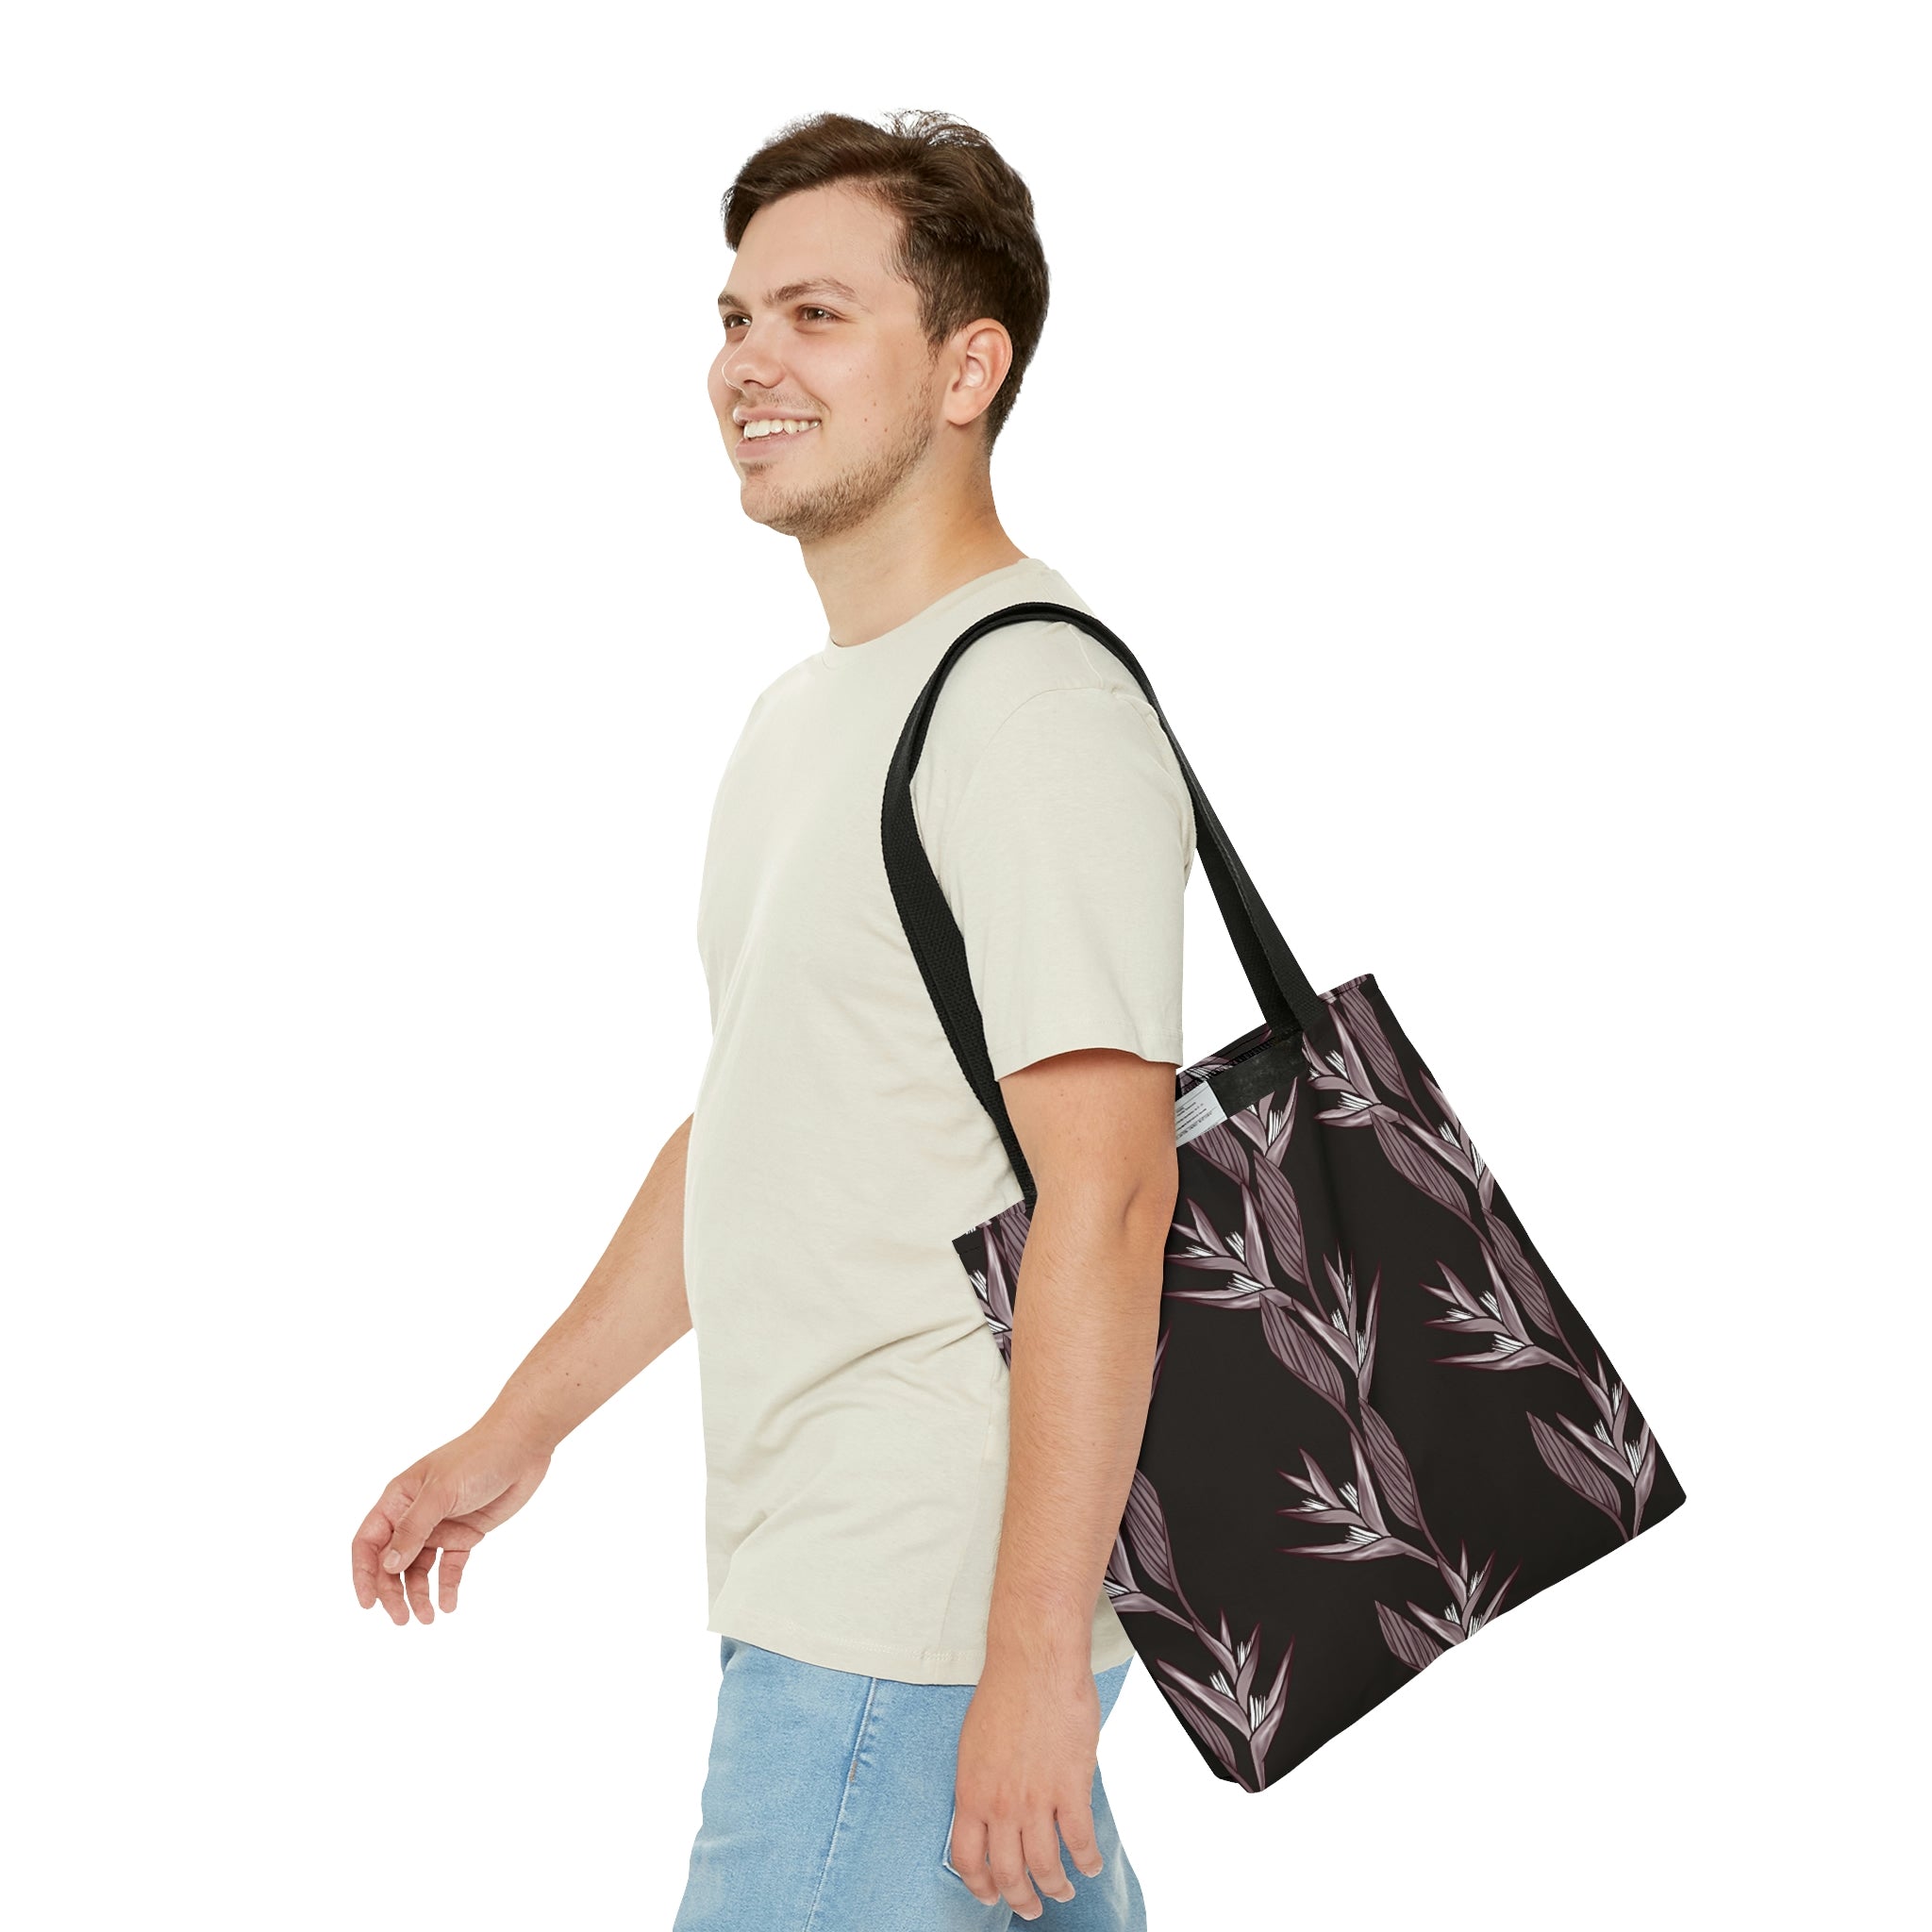 Heliconia Flower Print Tote Bag